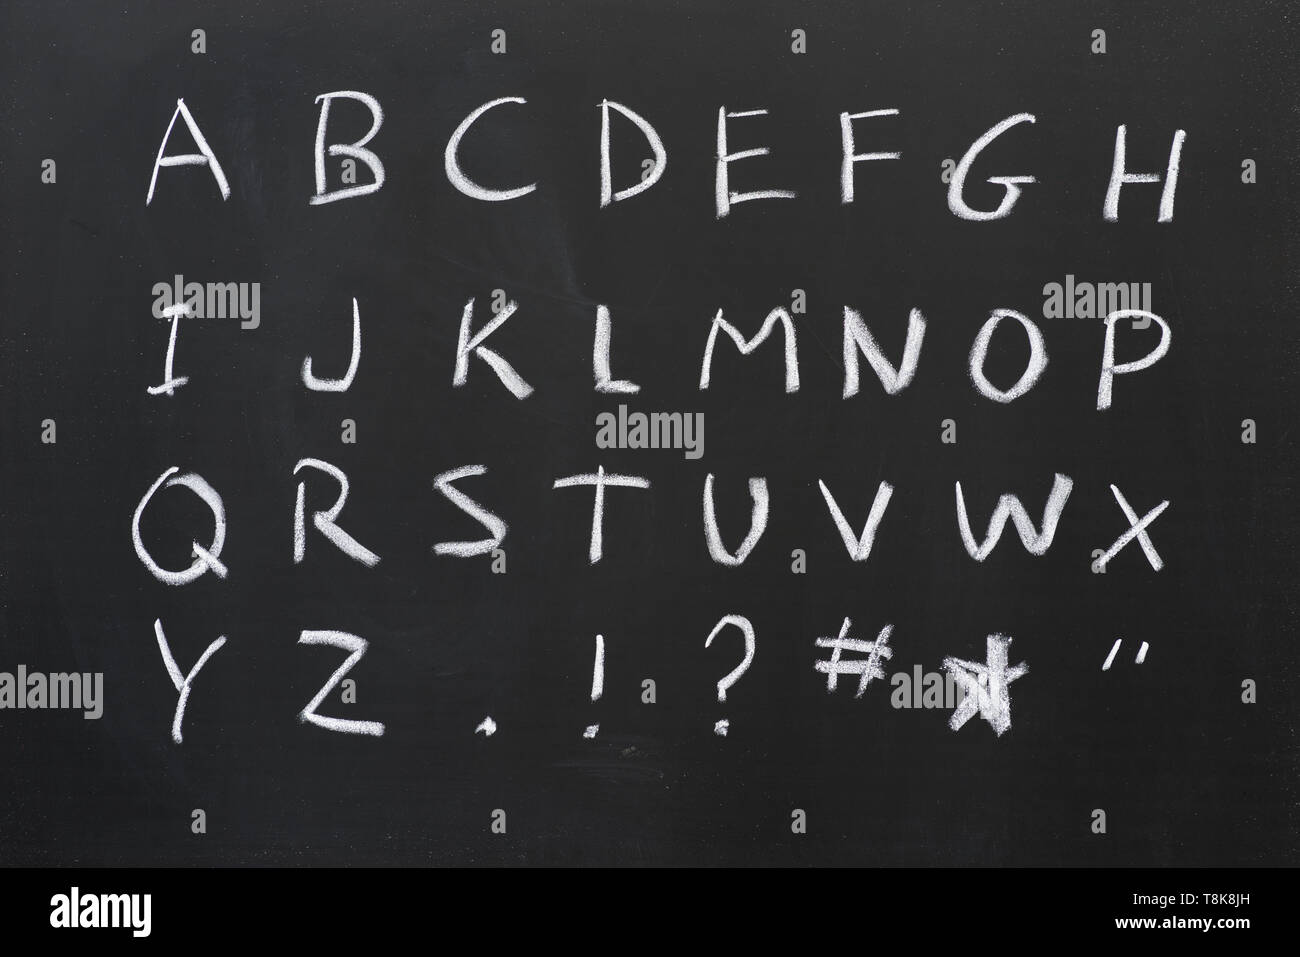 capital alphabet written in white chalk on a blackboard with some symbols Stock Photo